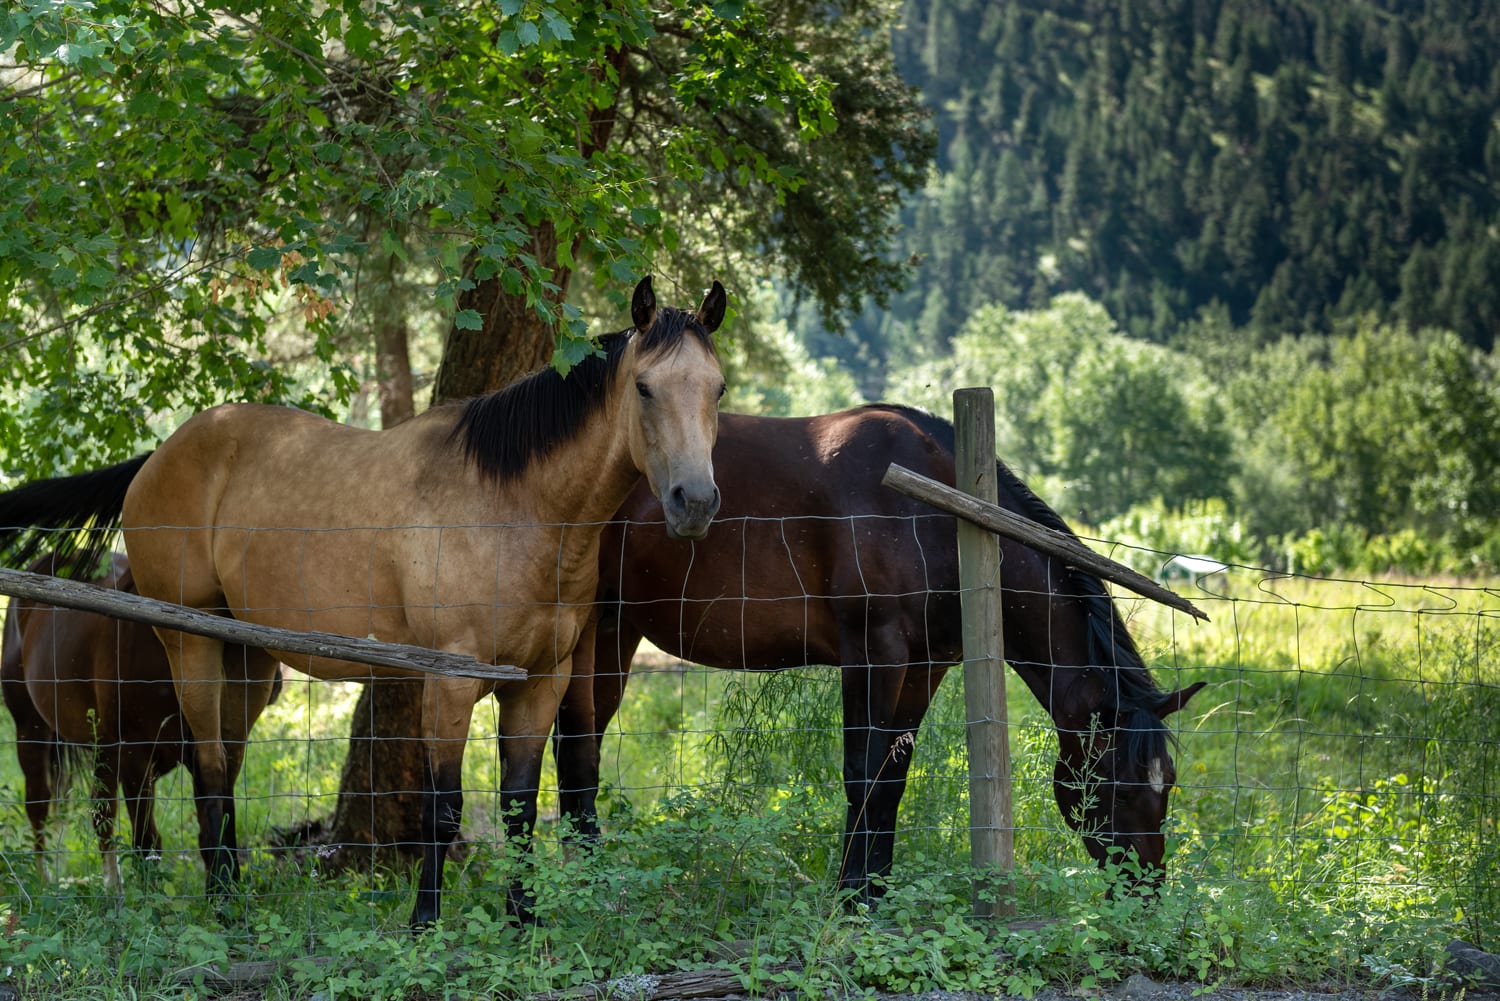 Kamloops rural life of horses grazing in a field with trees